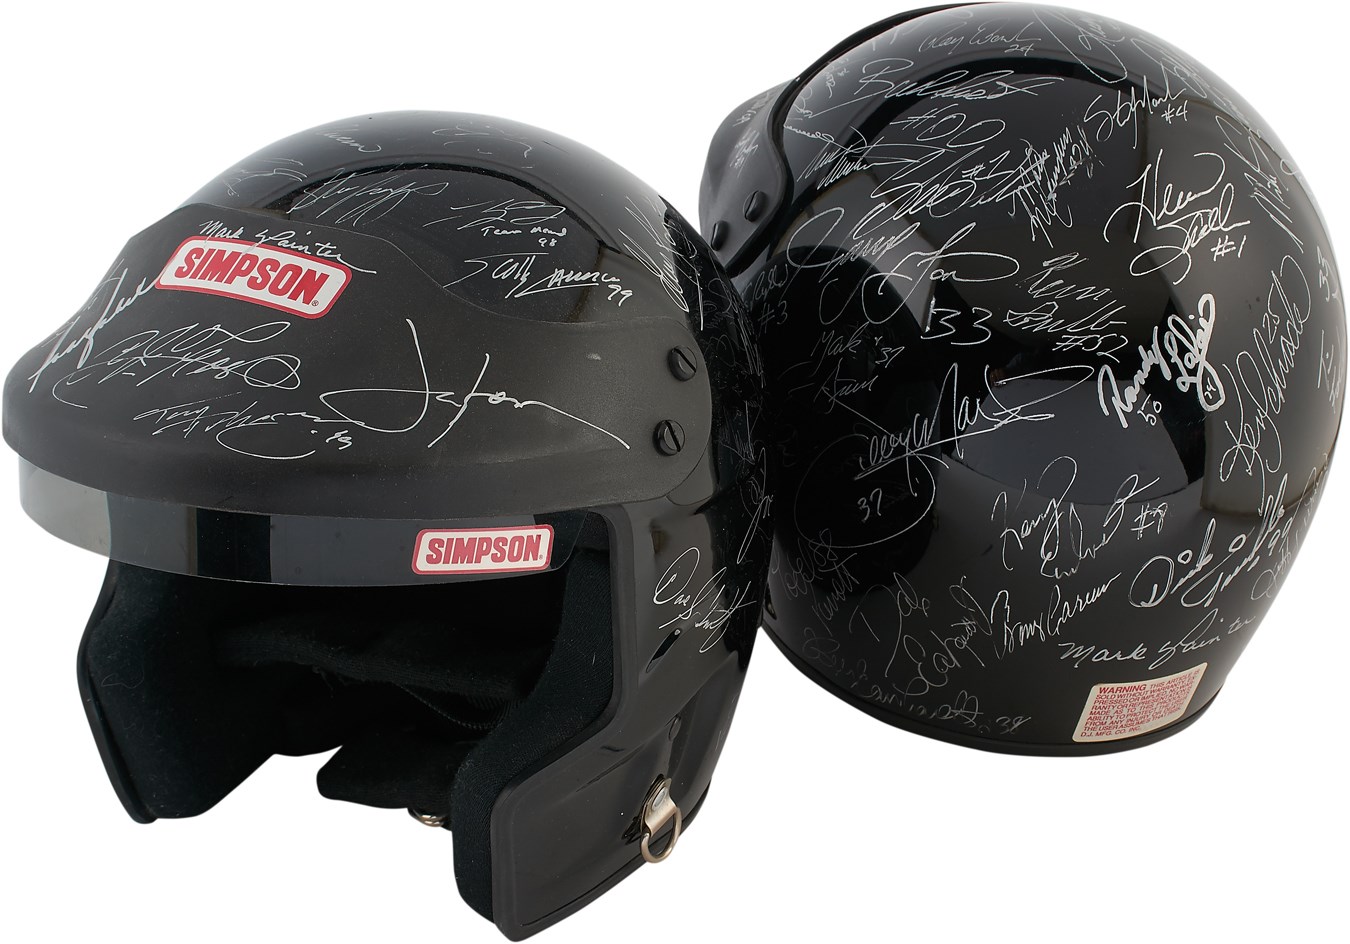 NASCAR Stars of Past and Present Signed Helmets